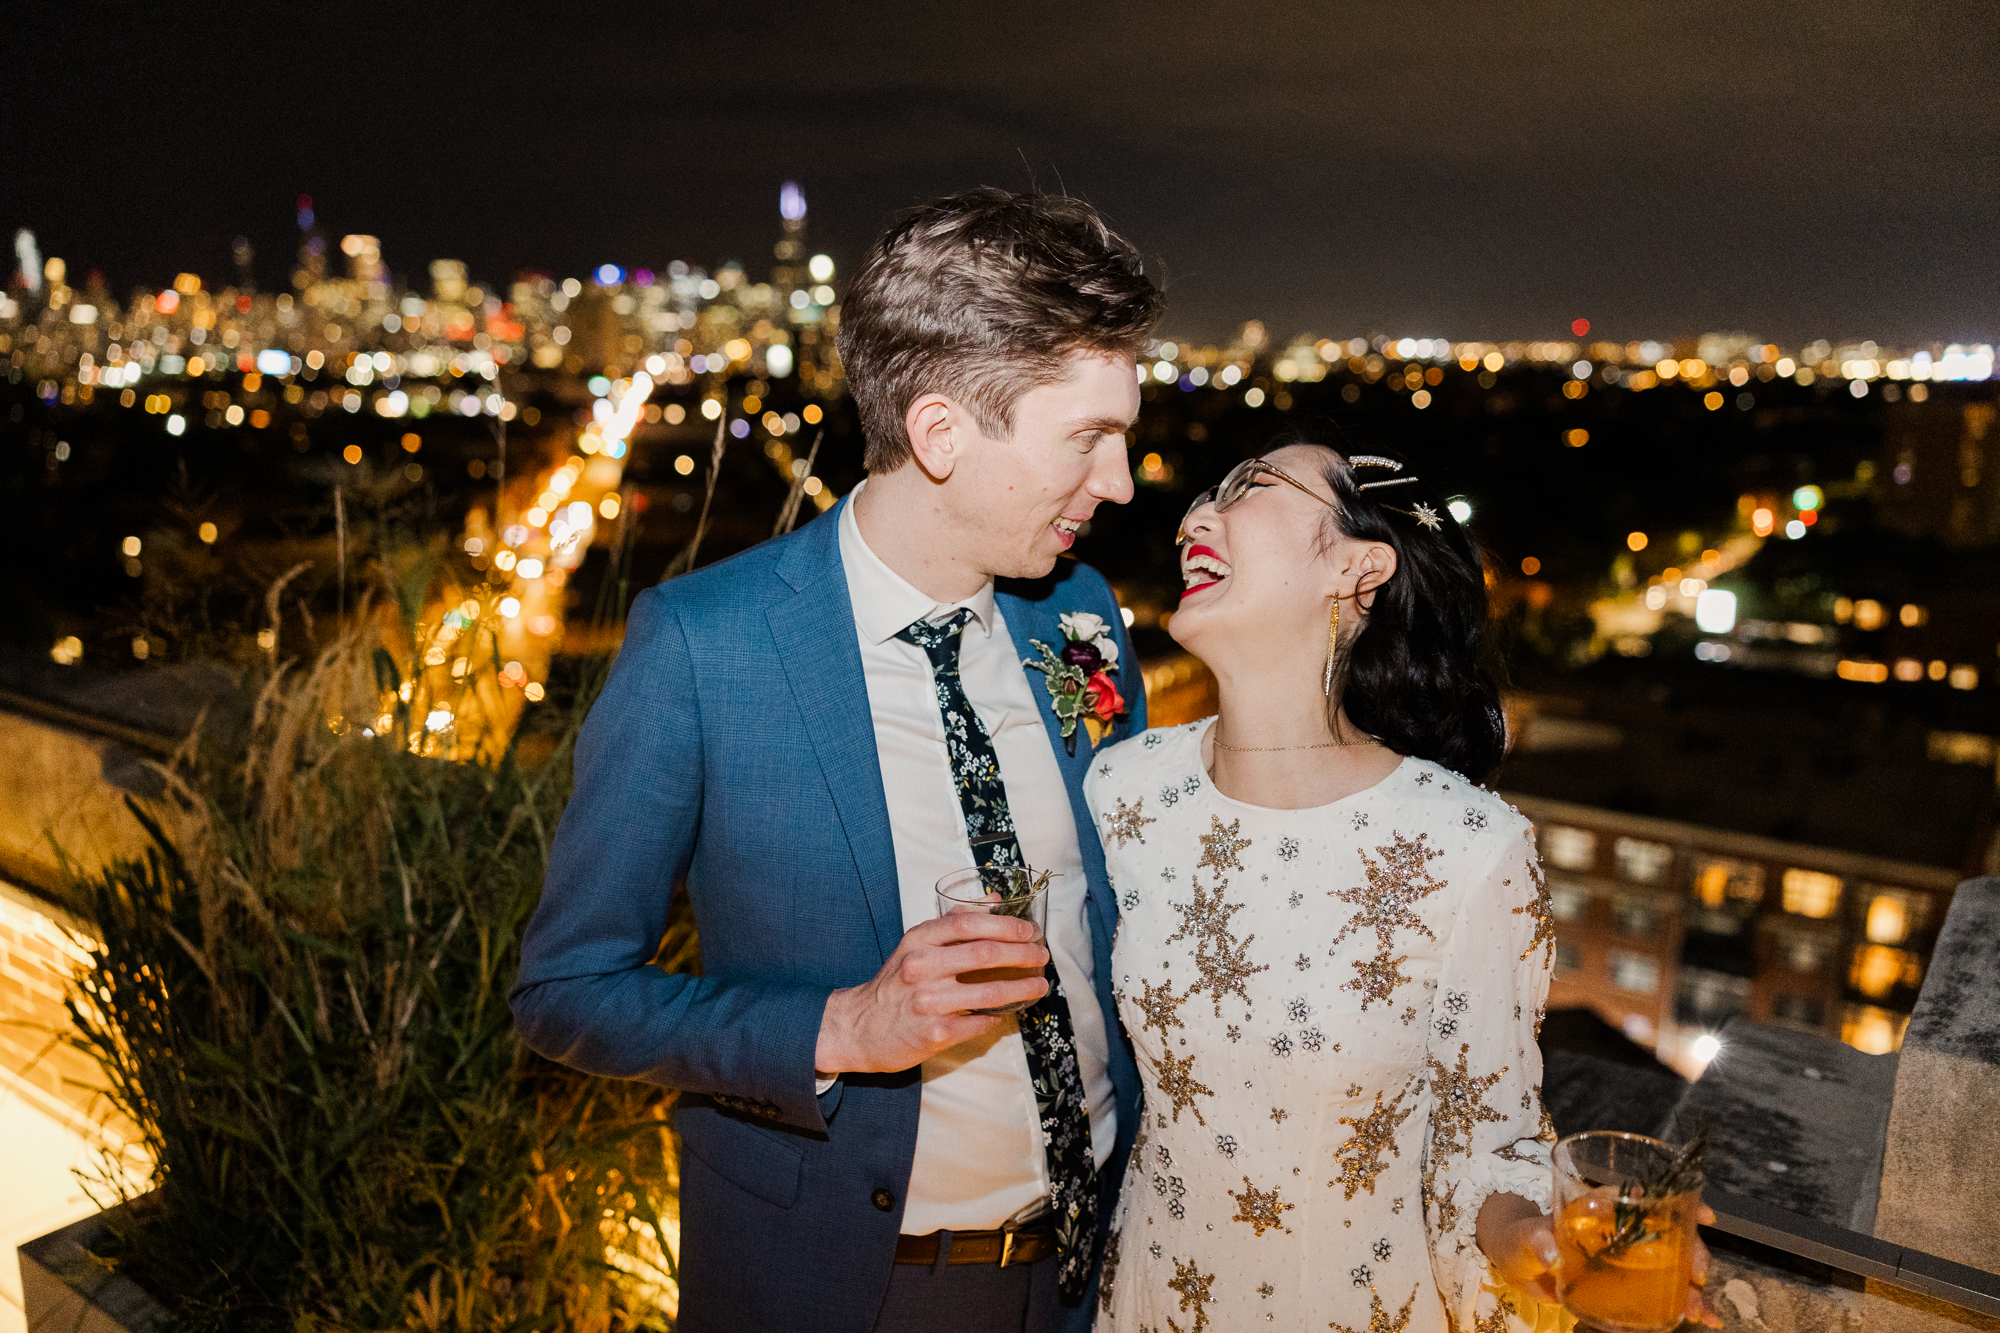 Scenic Chicago Micro Wedding Photos at Wicker Park Inn in Fall